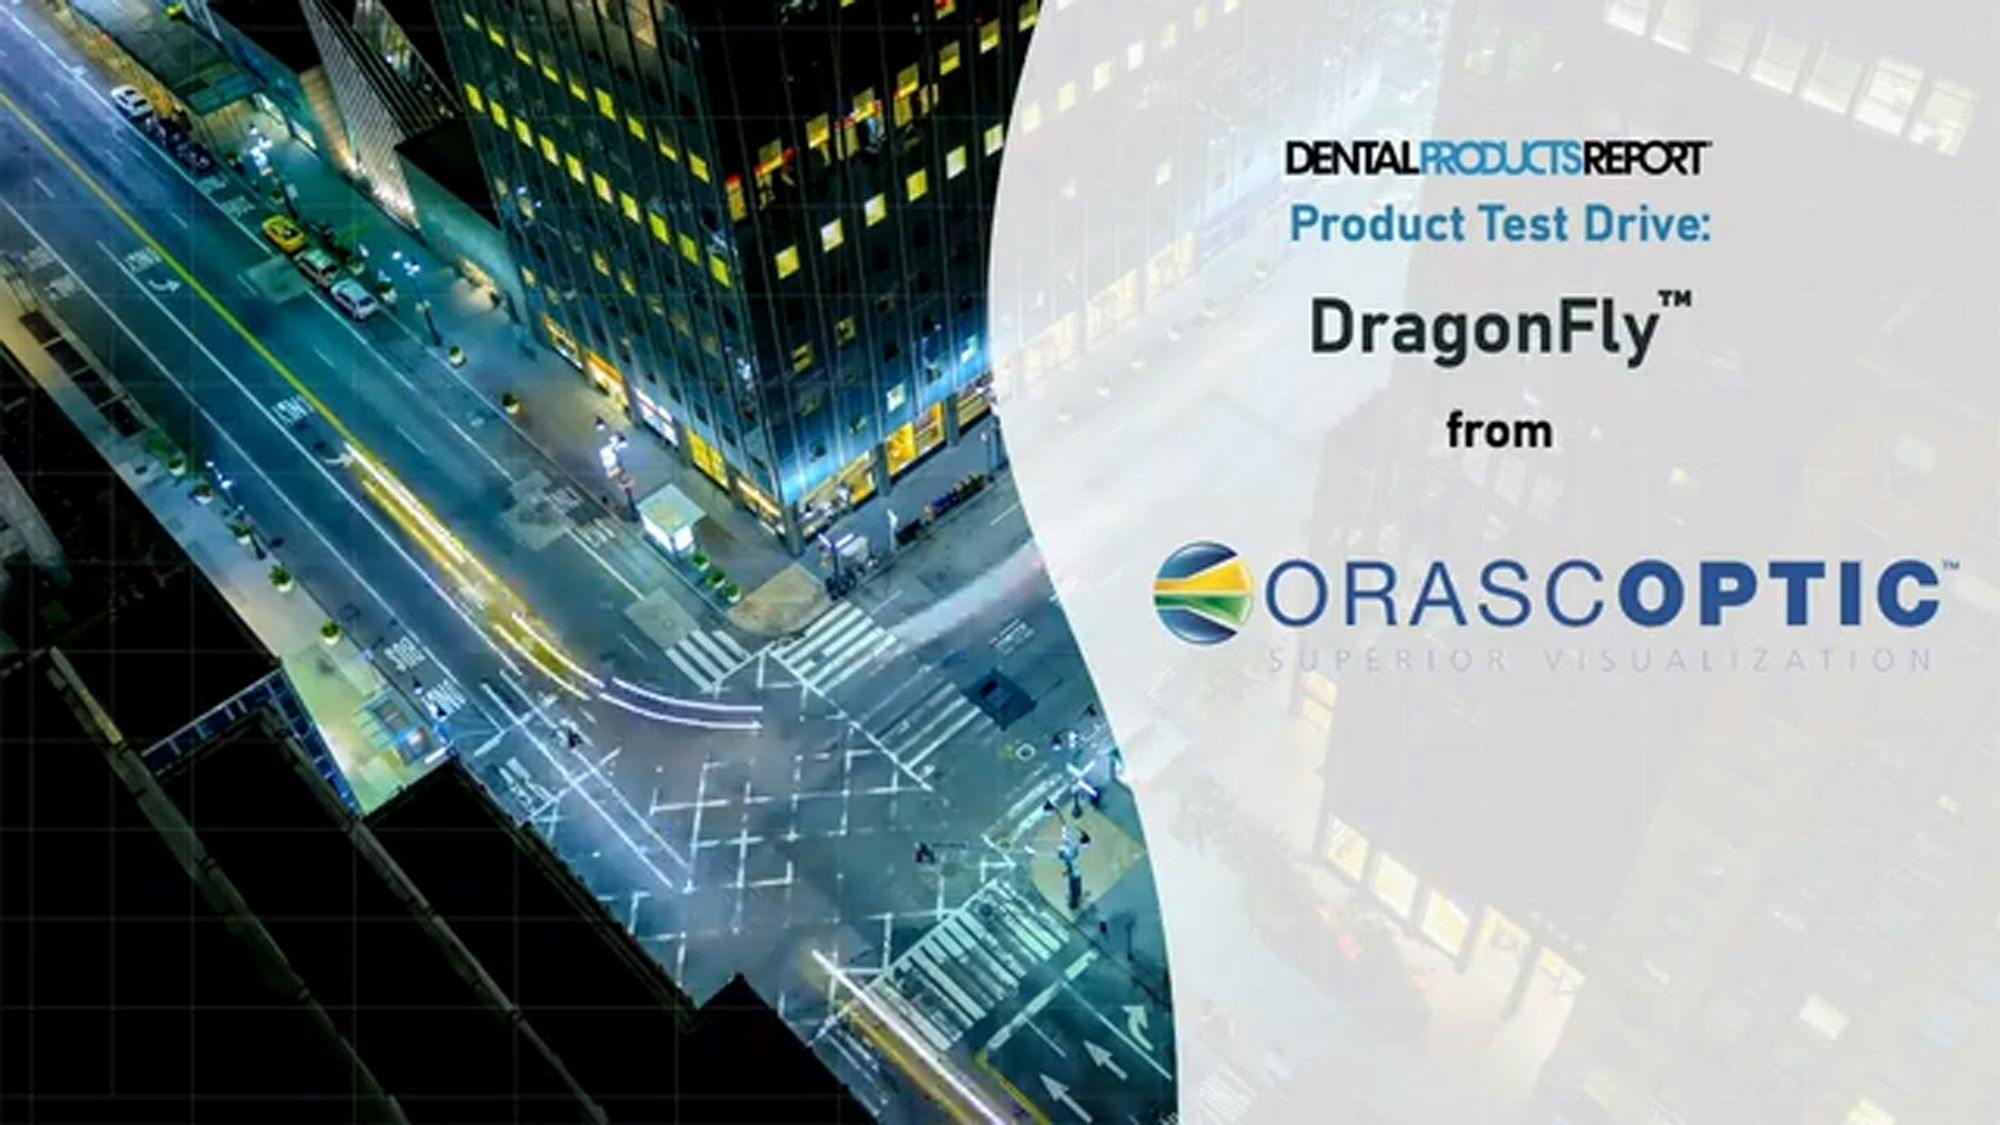 Video Test Drive: DragonFly from Orascoptic